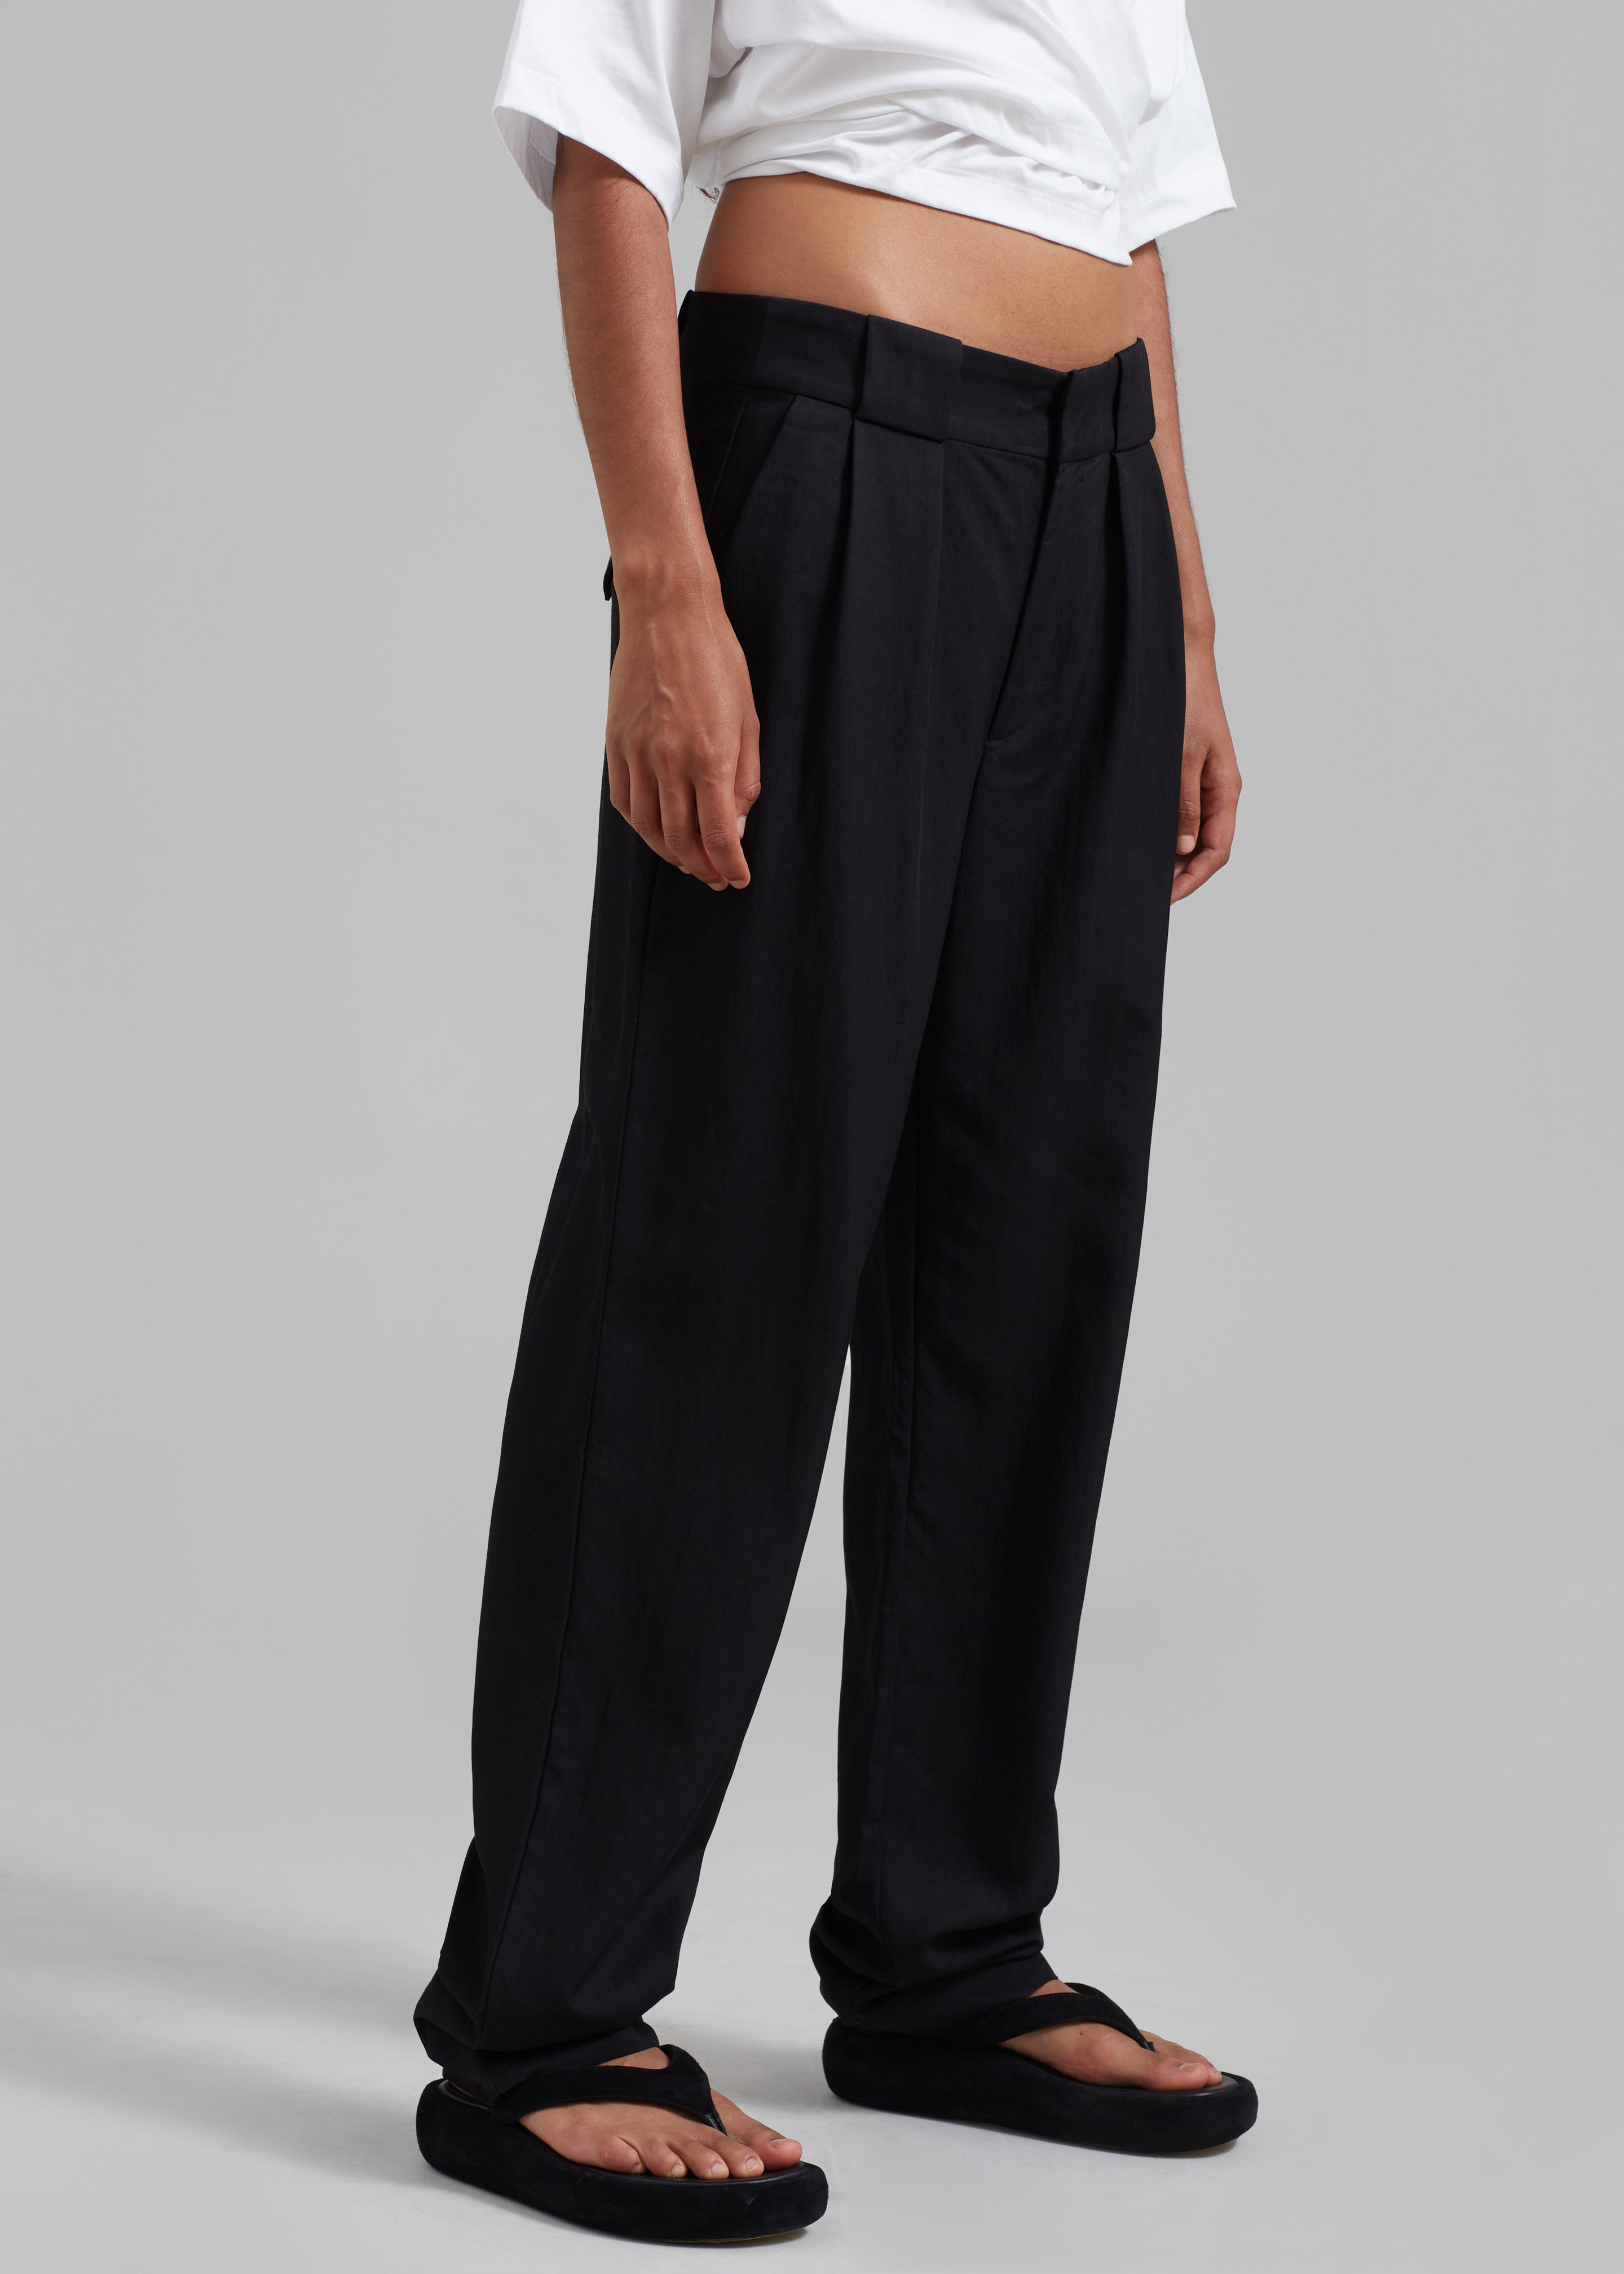 Proenza Schouler White Label Drapey Suiting Trousers - Black - 2